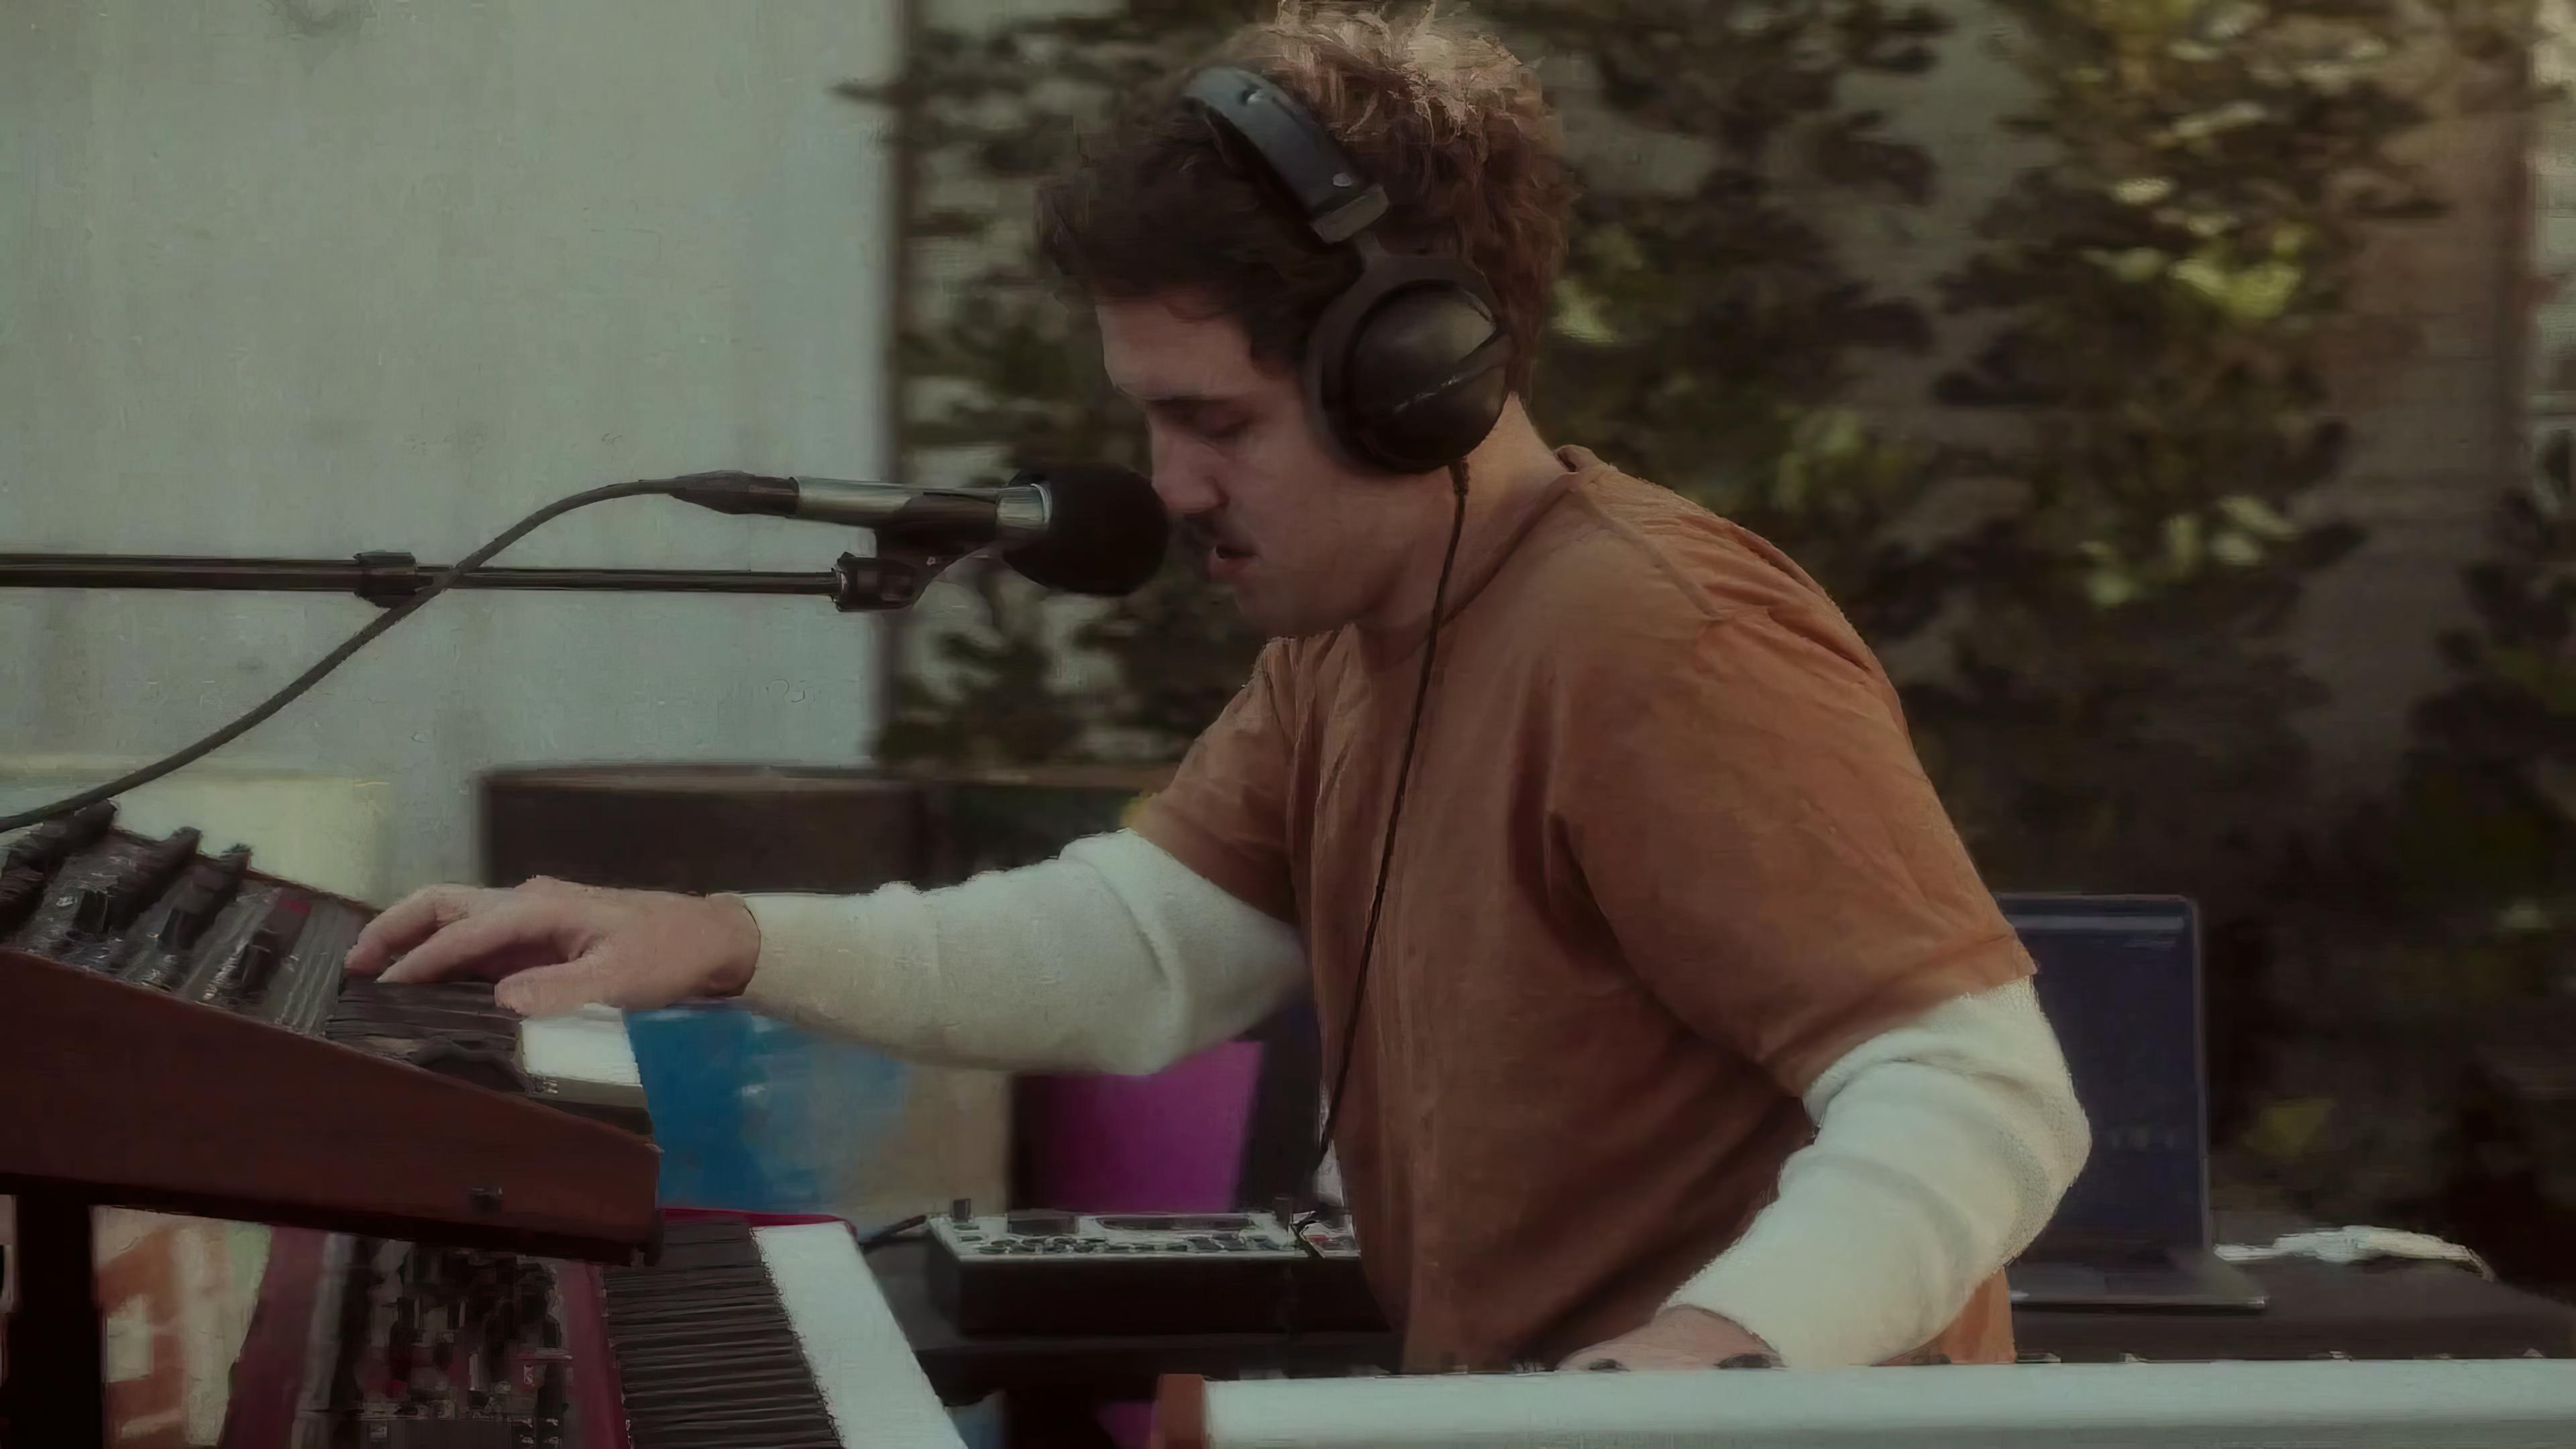 Ritt Momney is performing on a keyboard for a live session. The musician, a young male with curly hair, is wearing a cream-colored sweater with rolled-up sleeves over an orange shirt. His focus is on the instrument, with a microphone set up in front of him, capturing the performance. The setting is outdoors with greenery in the background, suggesting a relaxed, natural atmosphere for the session.